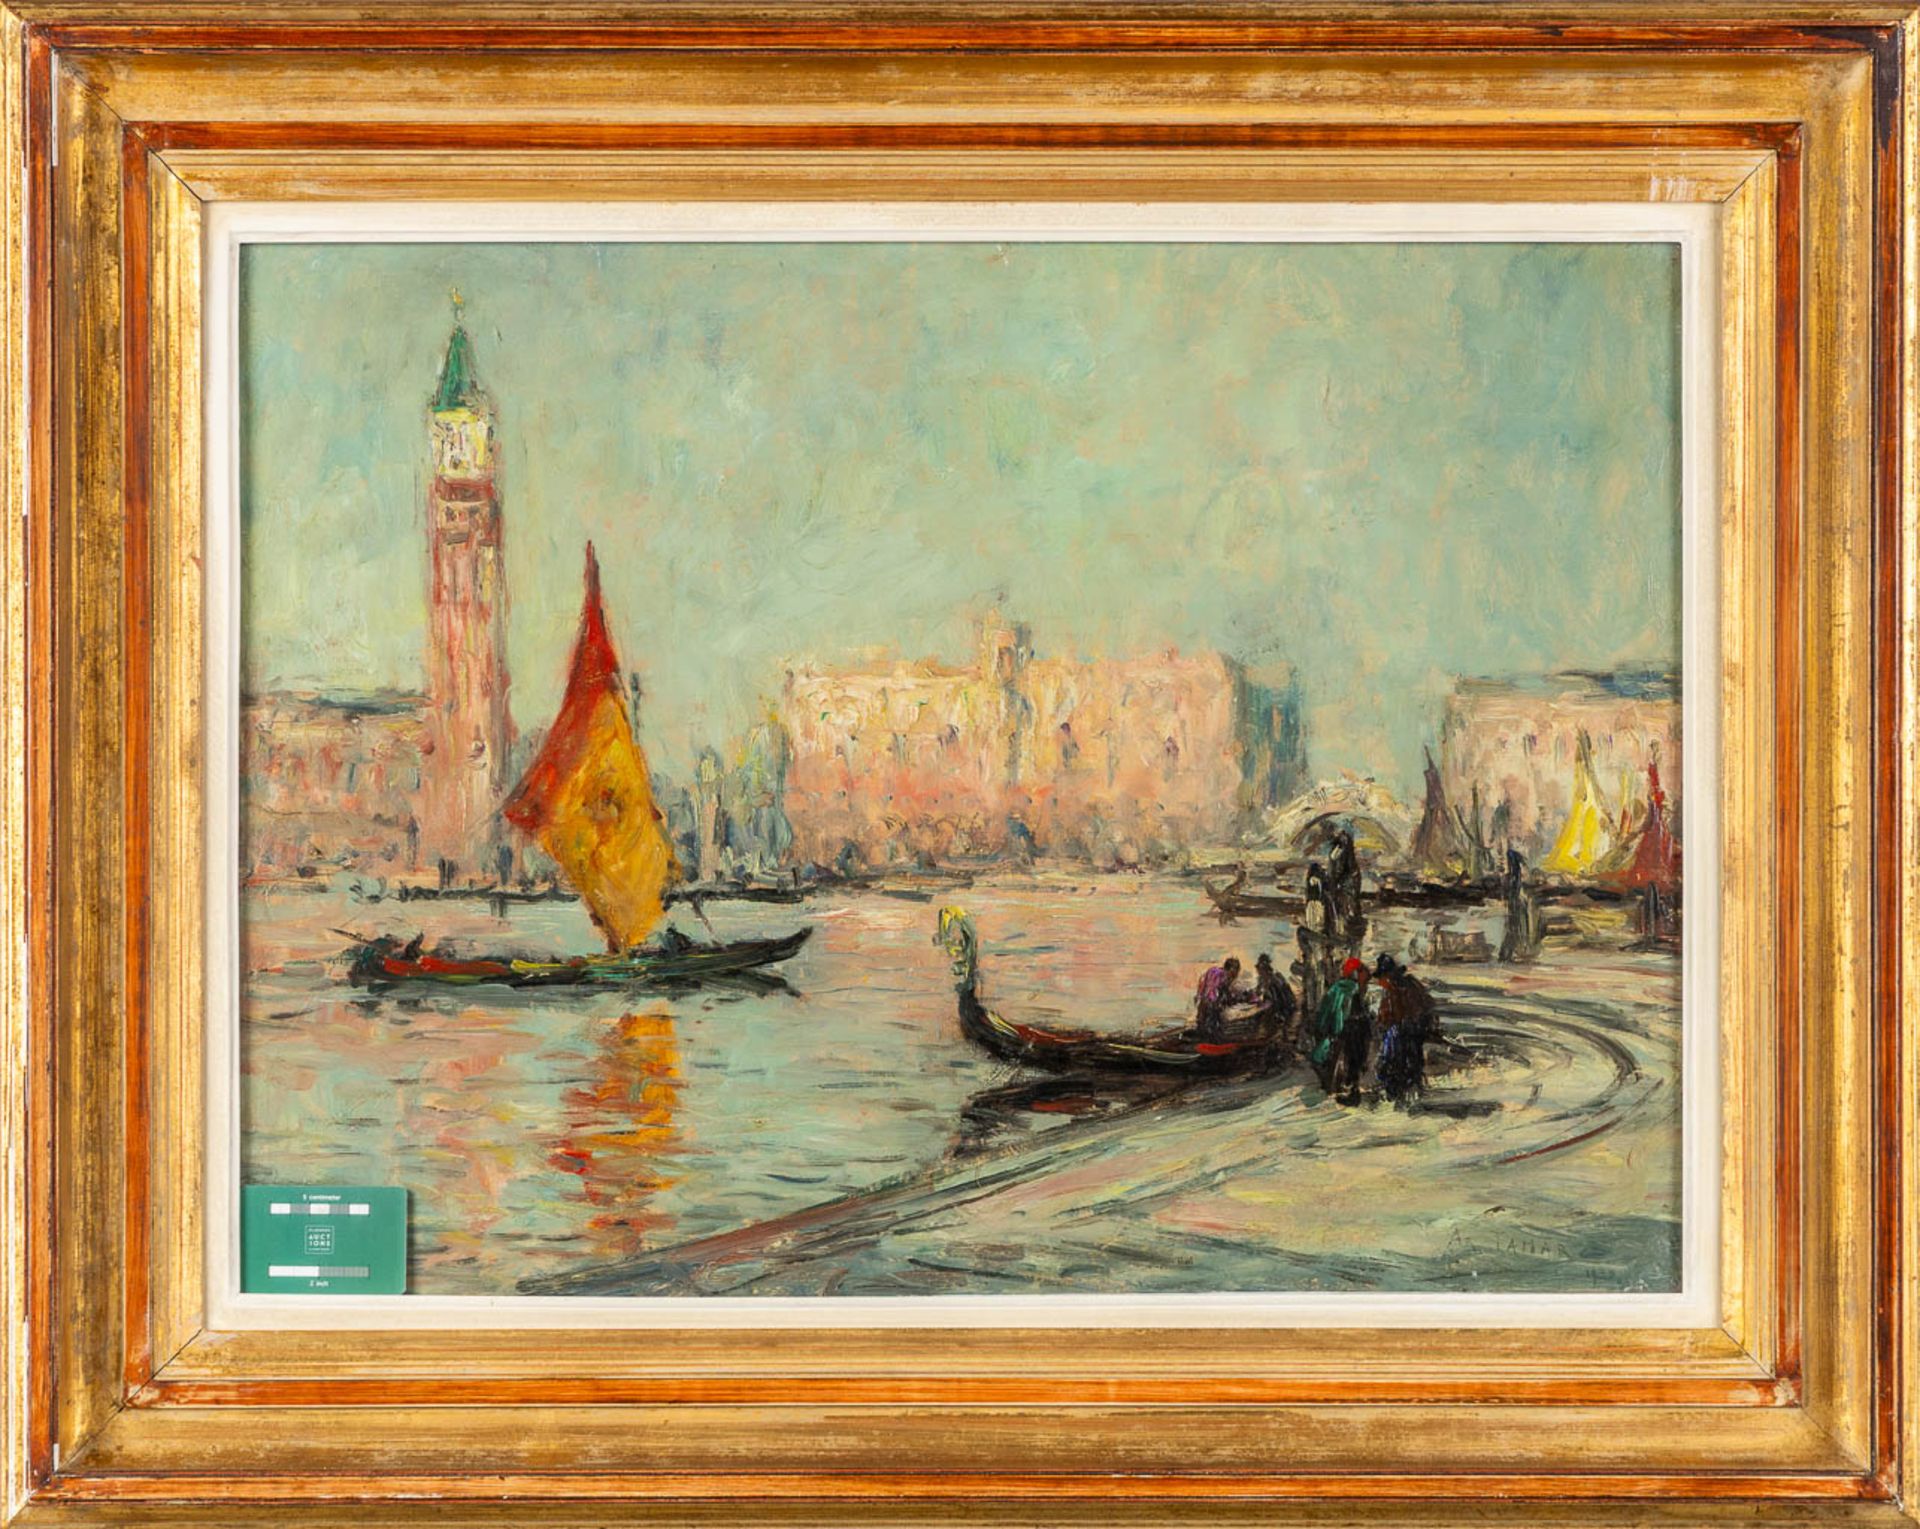 Armand JAMAR (1870-1946) 'View on Venice, Italy' 1930. (W:75 x H:55 cm) - Image 2 of 7